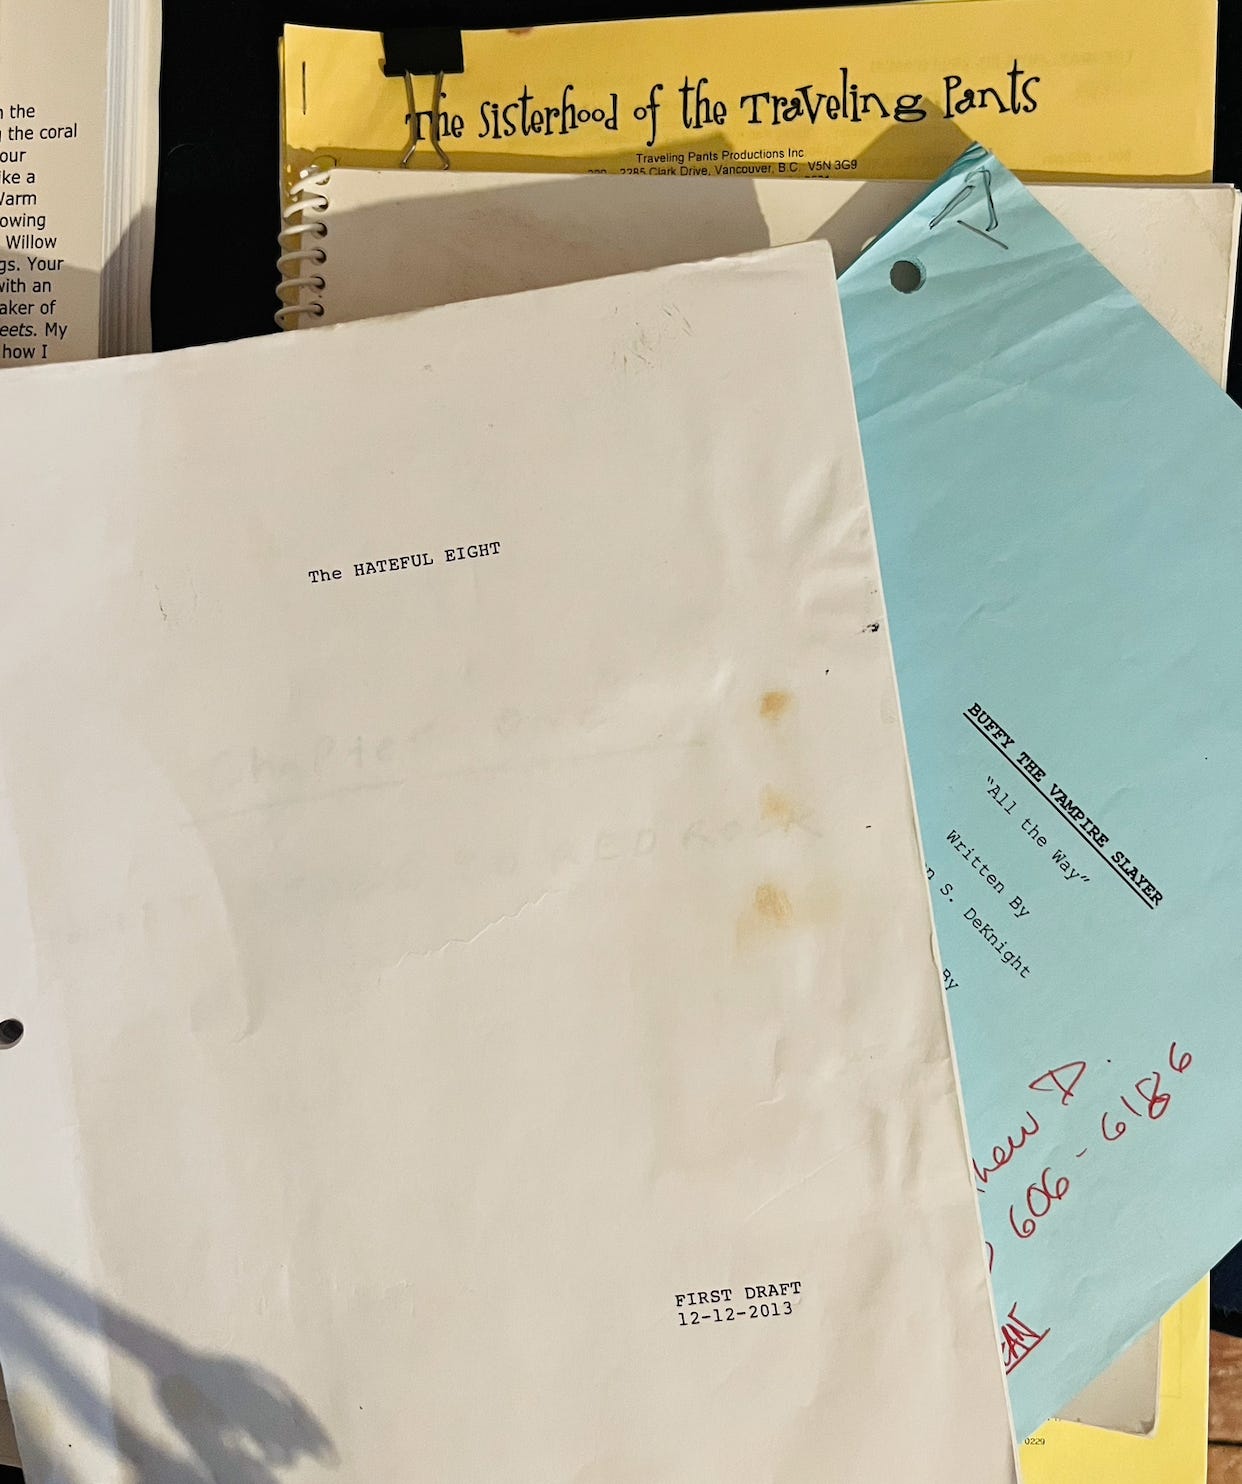 A stack of old scripts. Visible titles on the scripts are "The Hateful Eight," "Buffy the Vampire Slayer," and "The Sisterhood of the Traveling Pants."